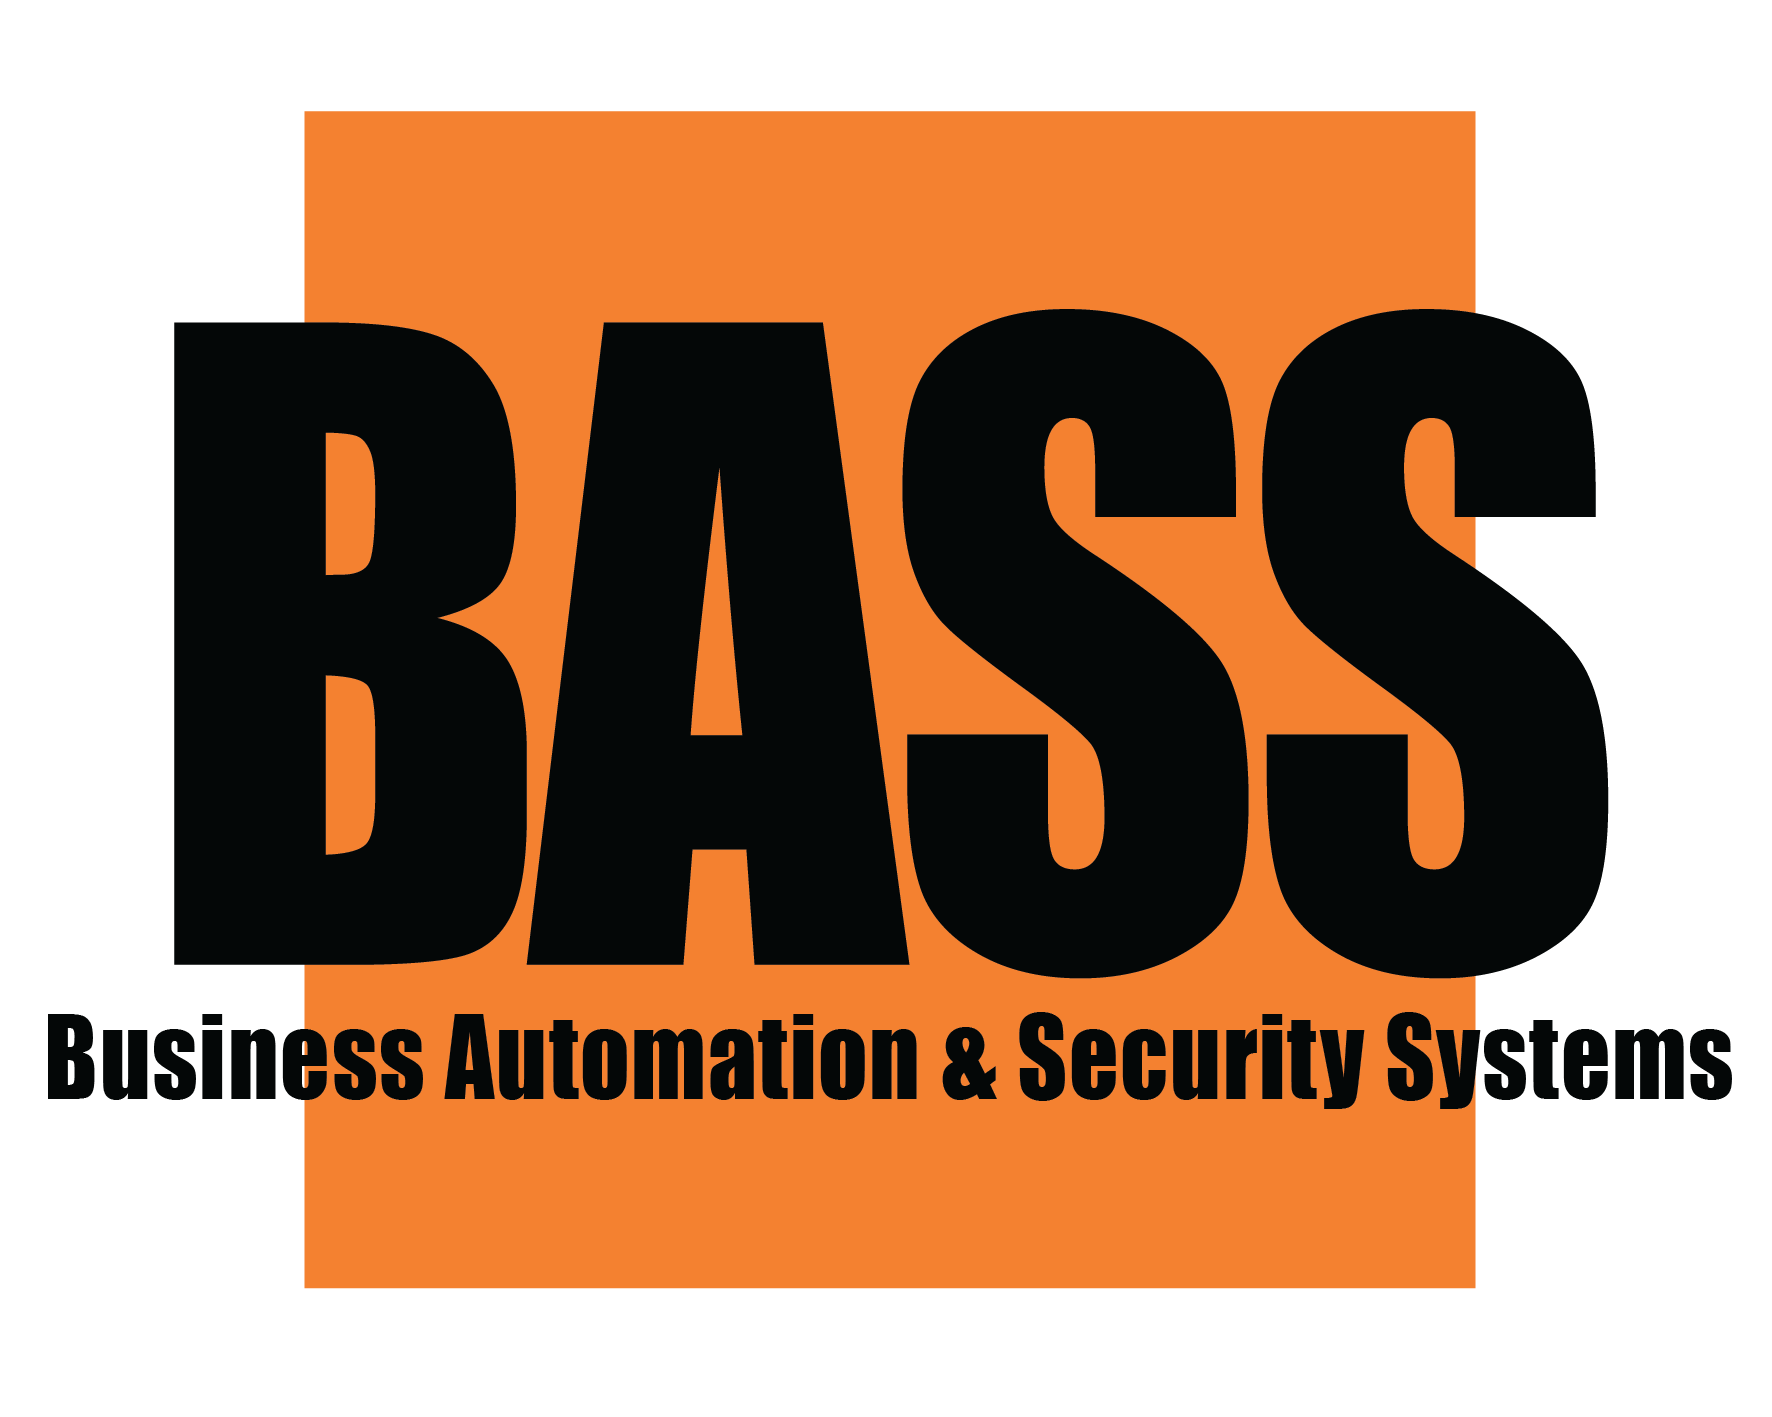 Business Automation & Security Systems LLC